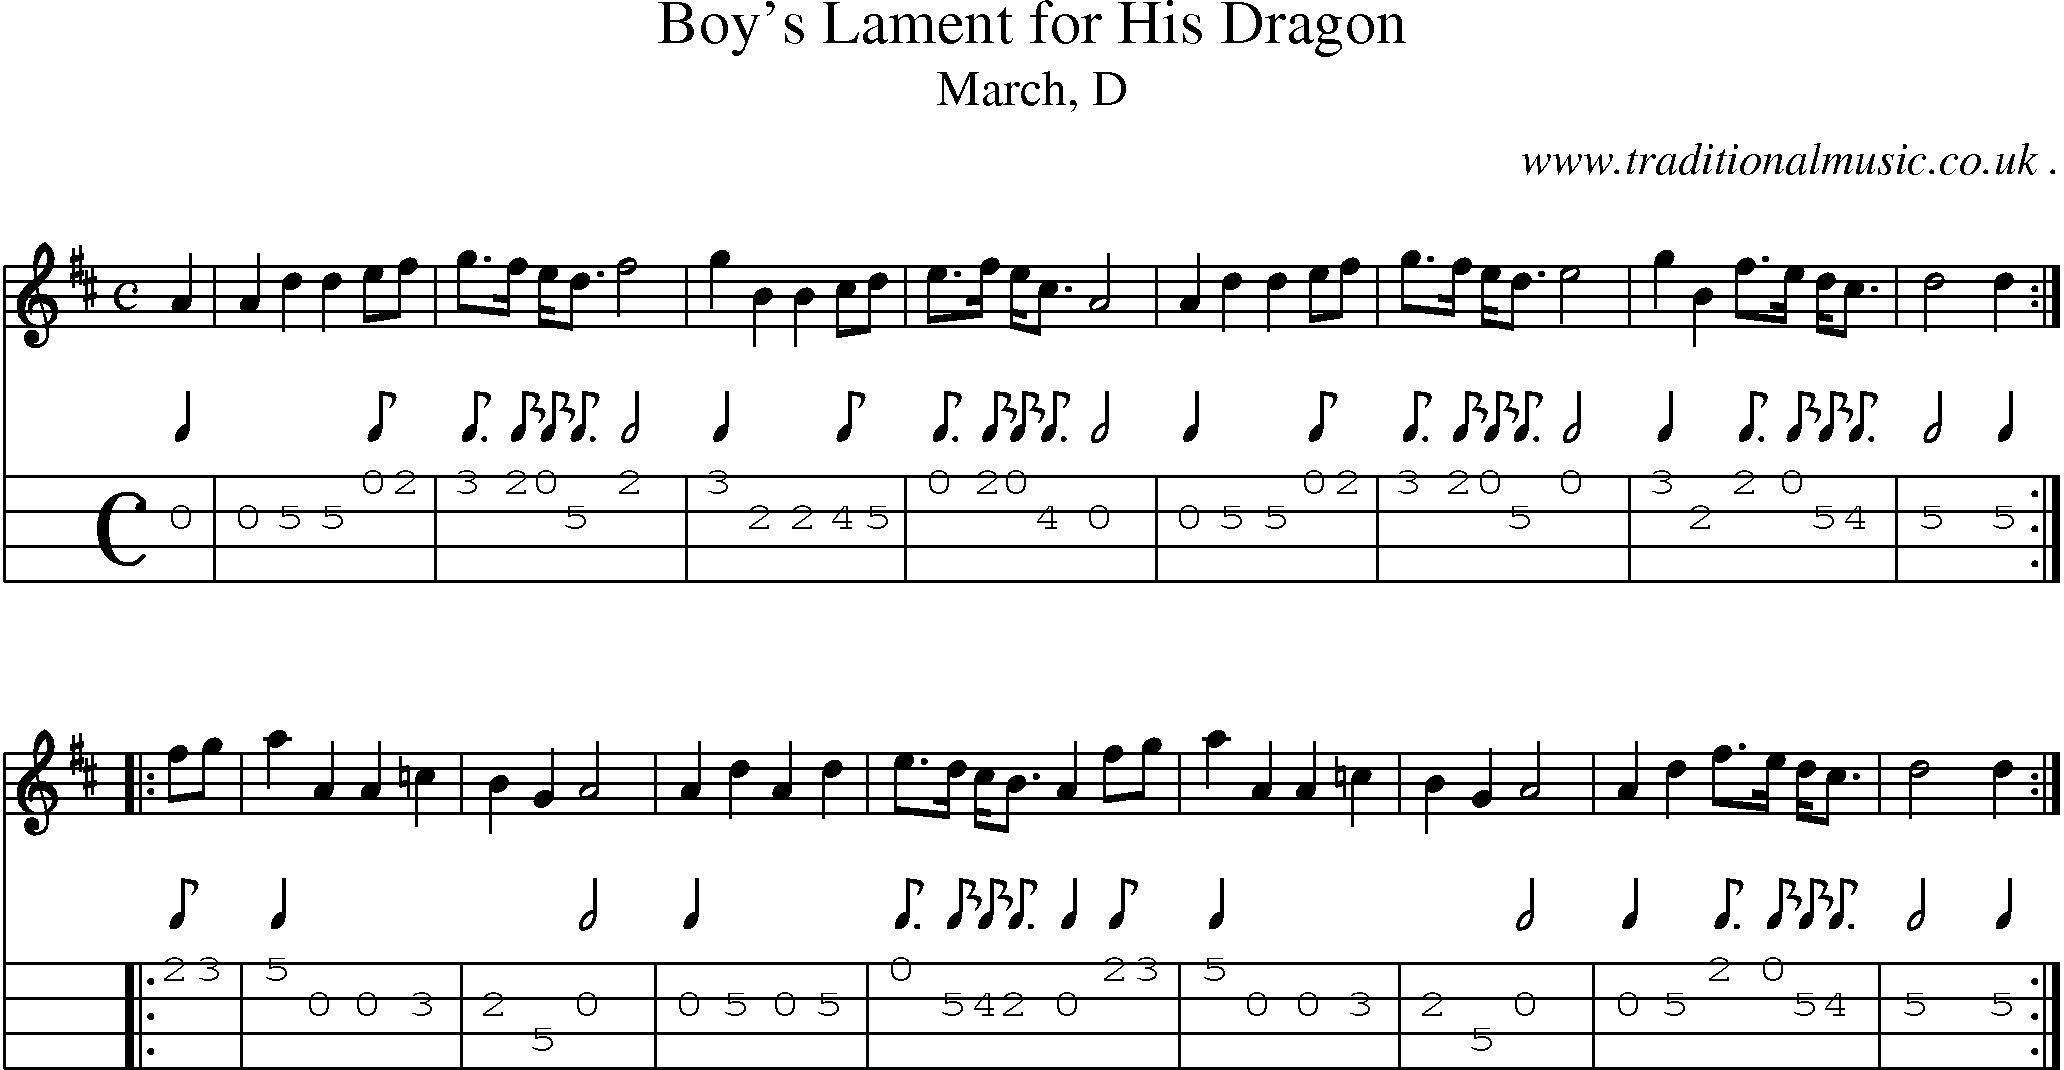 Sheet-music  score, Chords and Mandolin Tabs for Boys Lament For His Dragon